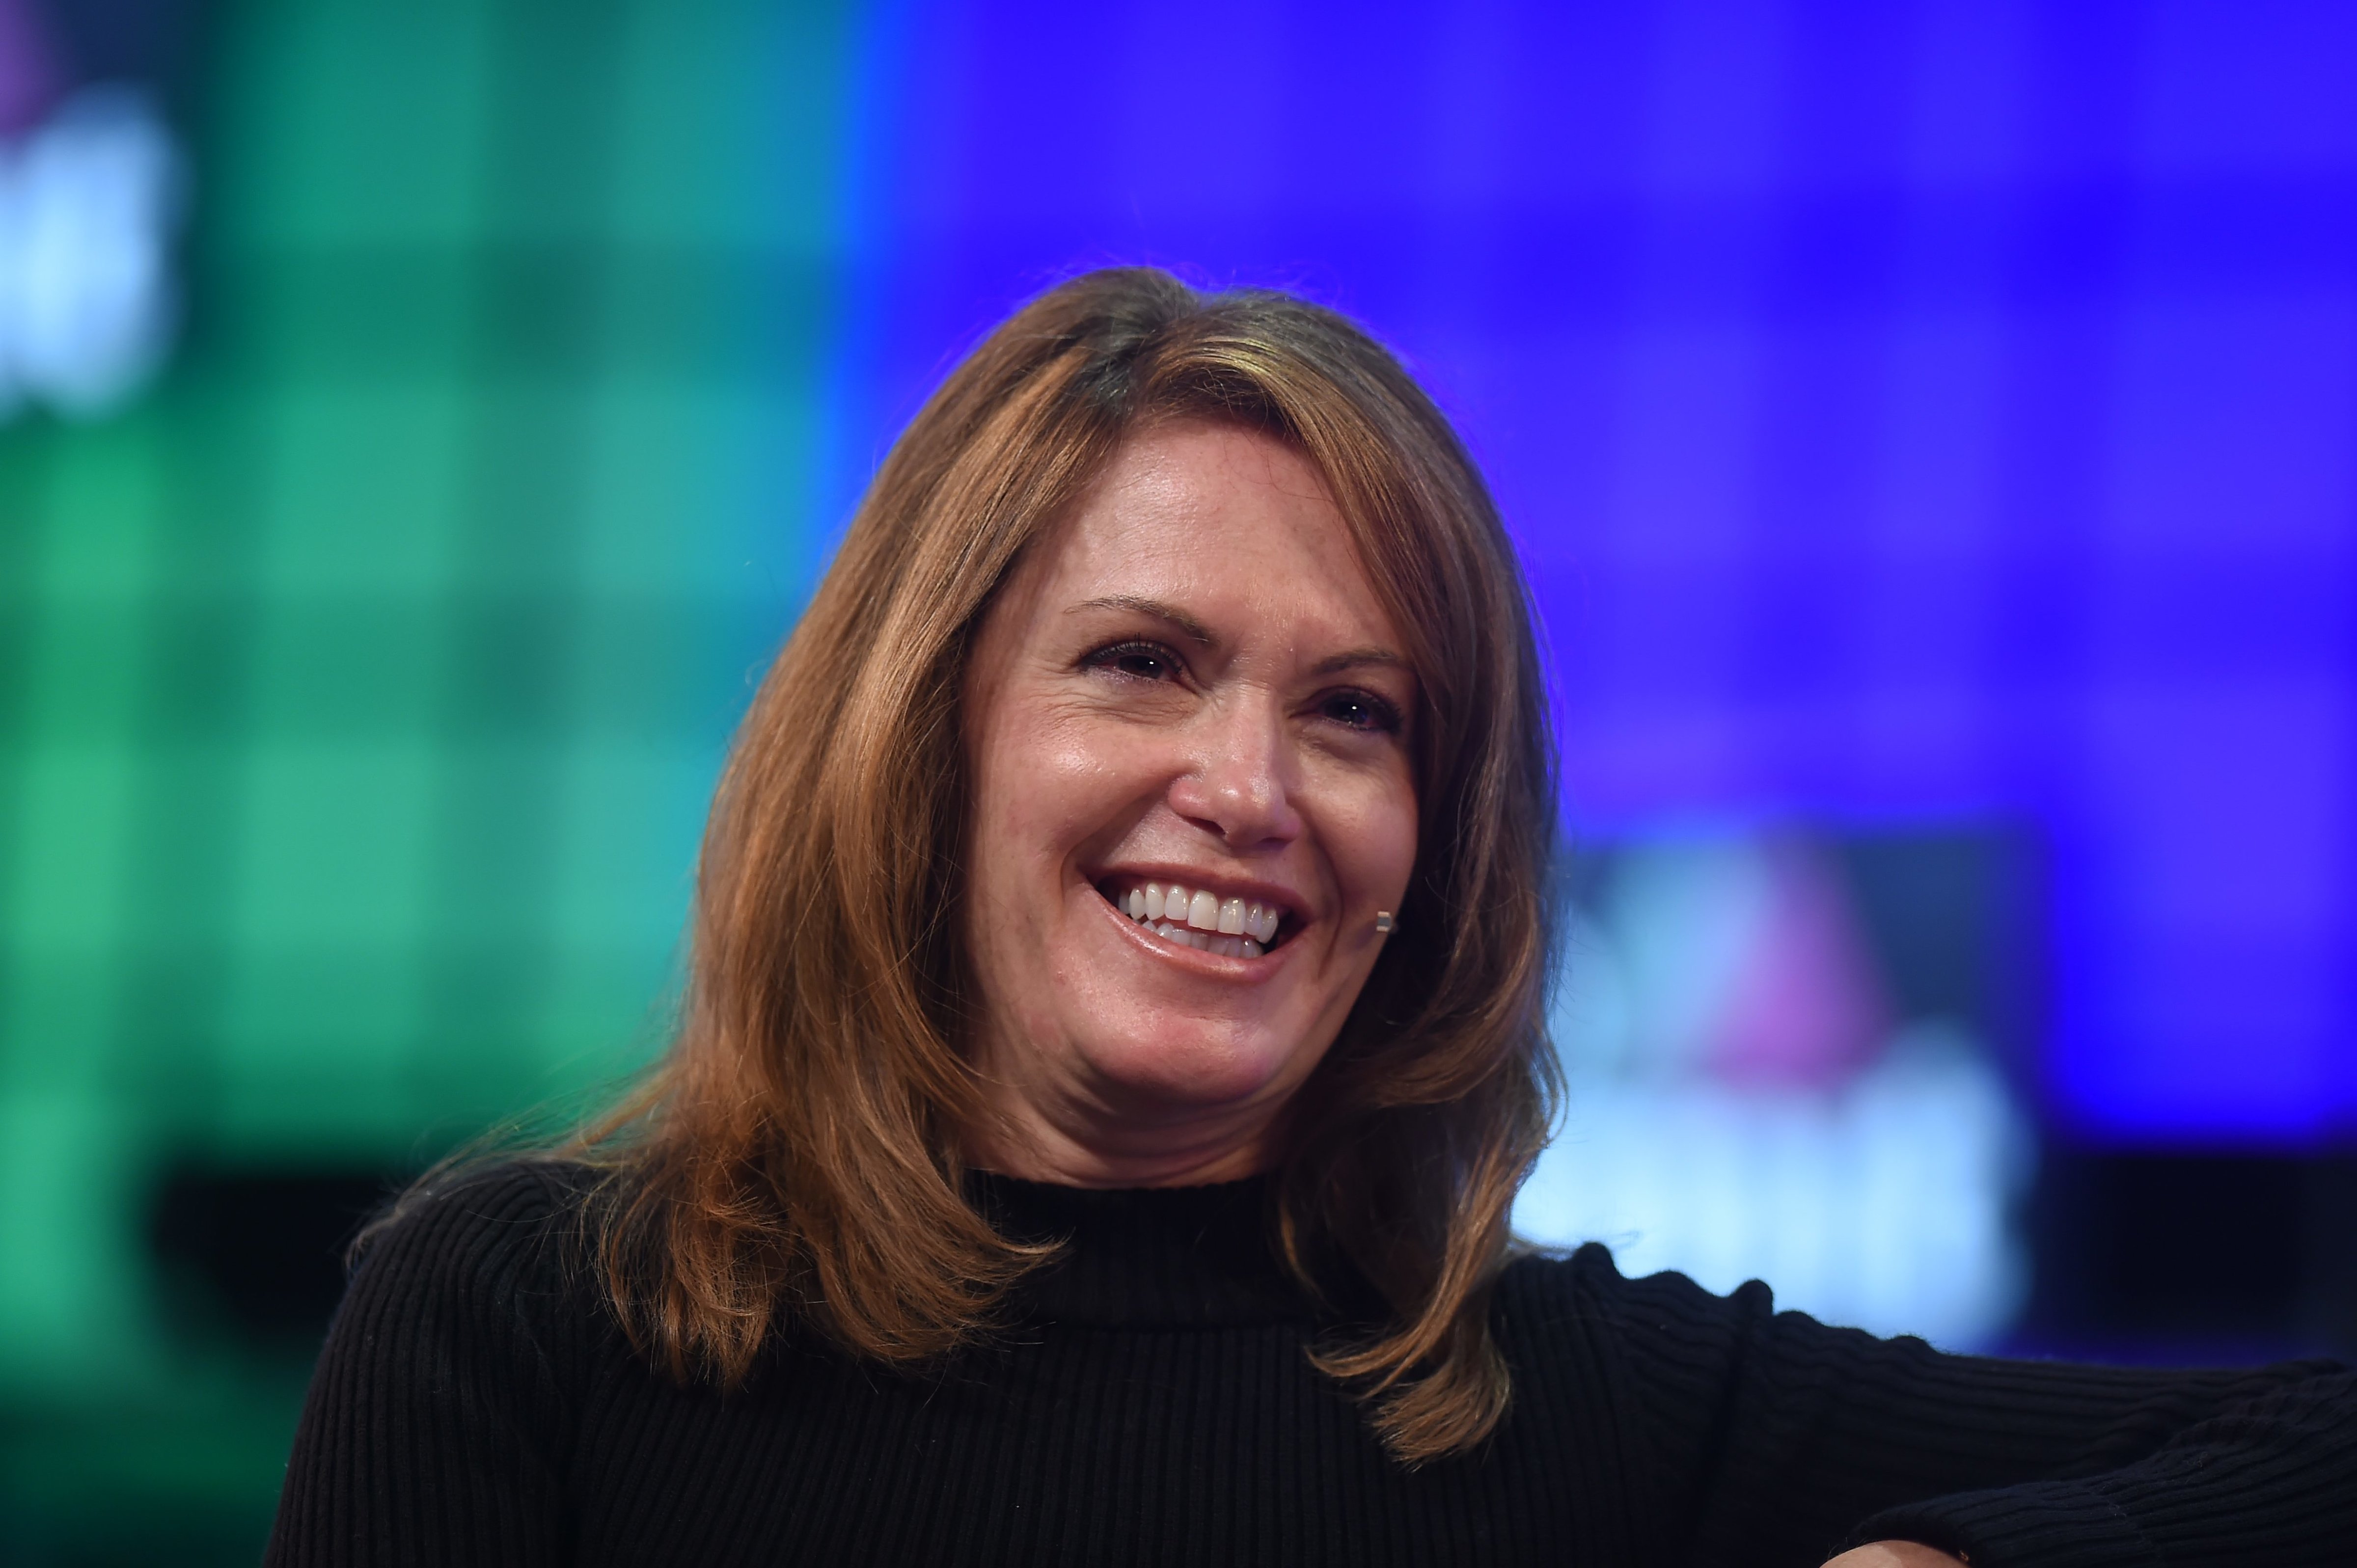 3 November 2015; Peggy Johnson, EVP of Business Development, Microsoft, on the Centre Stage during Day 1 of the 2015 Web Summit in the RDS, Dublin, Ireland. (Stephen McCarthy—portsfile/Corbis/Getty Images)